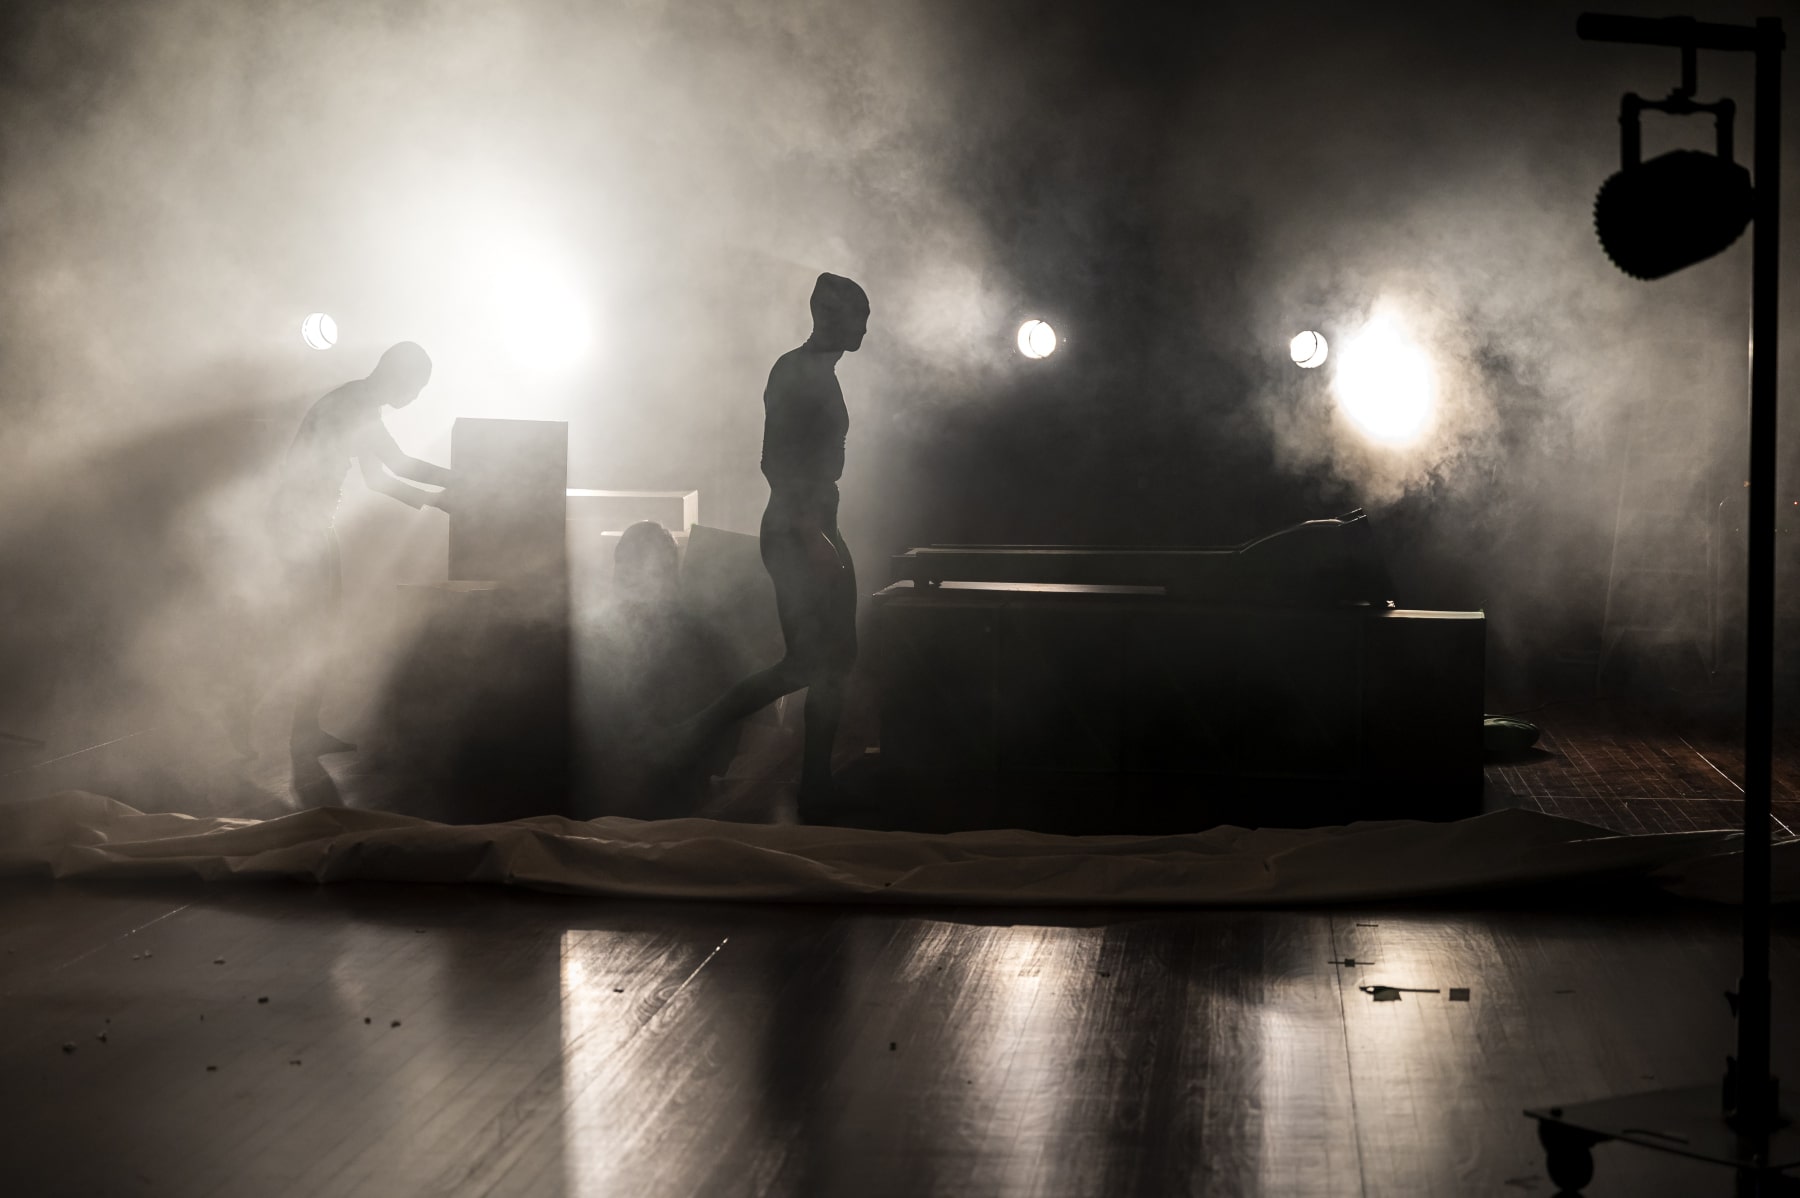 A stage with bright white lights and haze. You can see two figures in the haze. One is lifting up a box, the other is standing beside a tredmill.